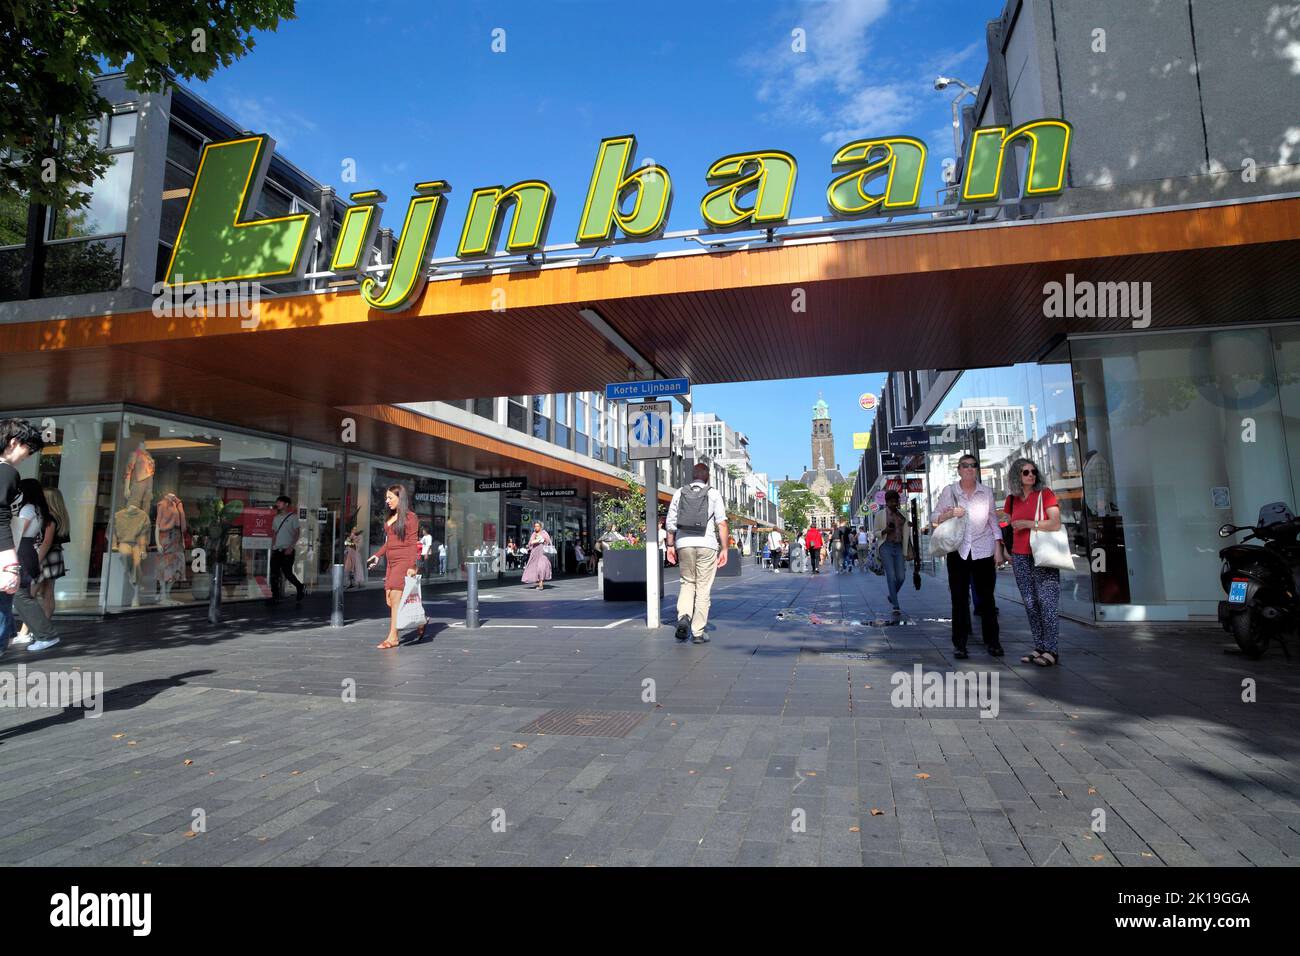 The Lijnbaan shopping area in Rotterdam, The Netherlands. (Looking towards the clock tower of Rotterdam City Hall.) Stock Photo